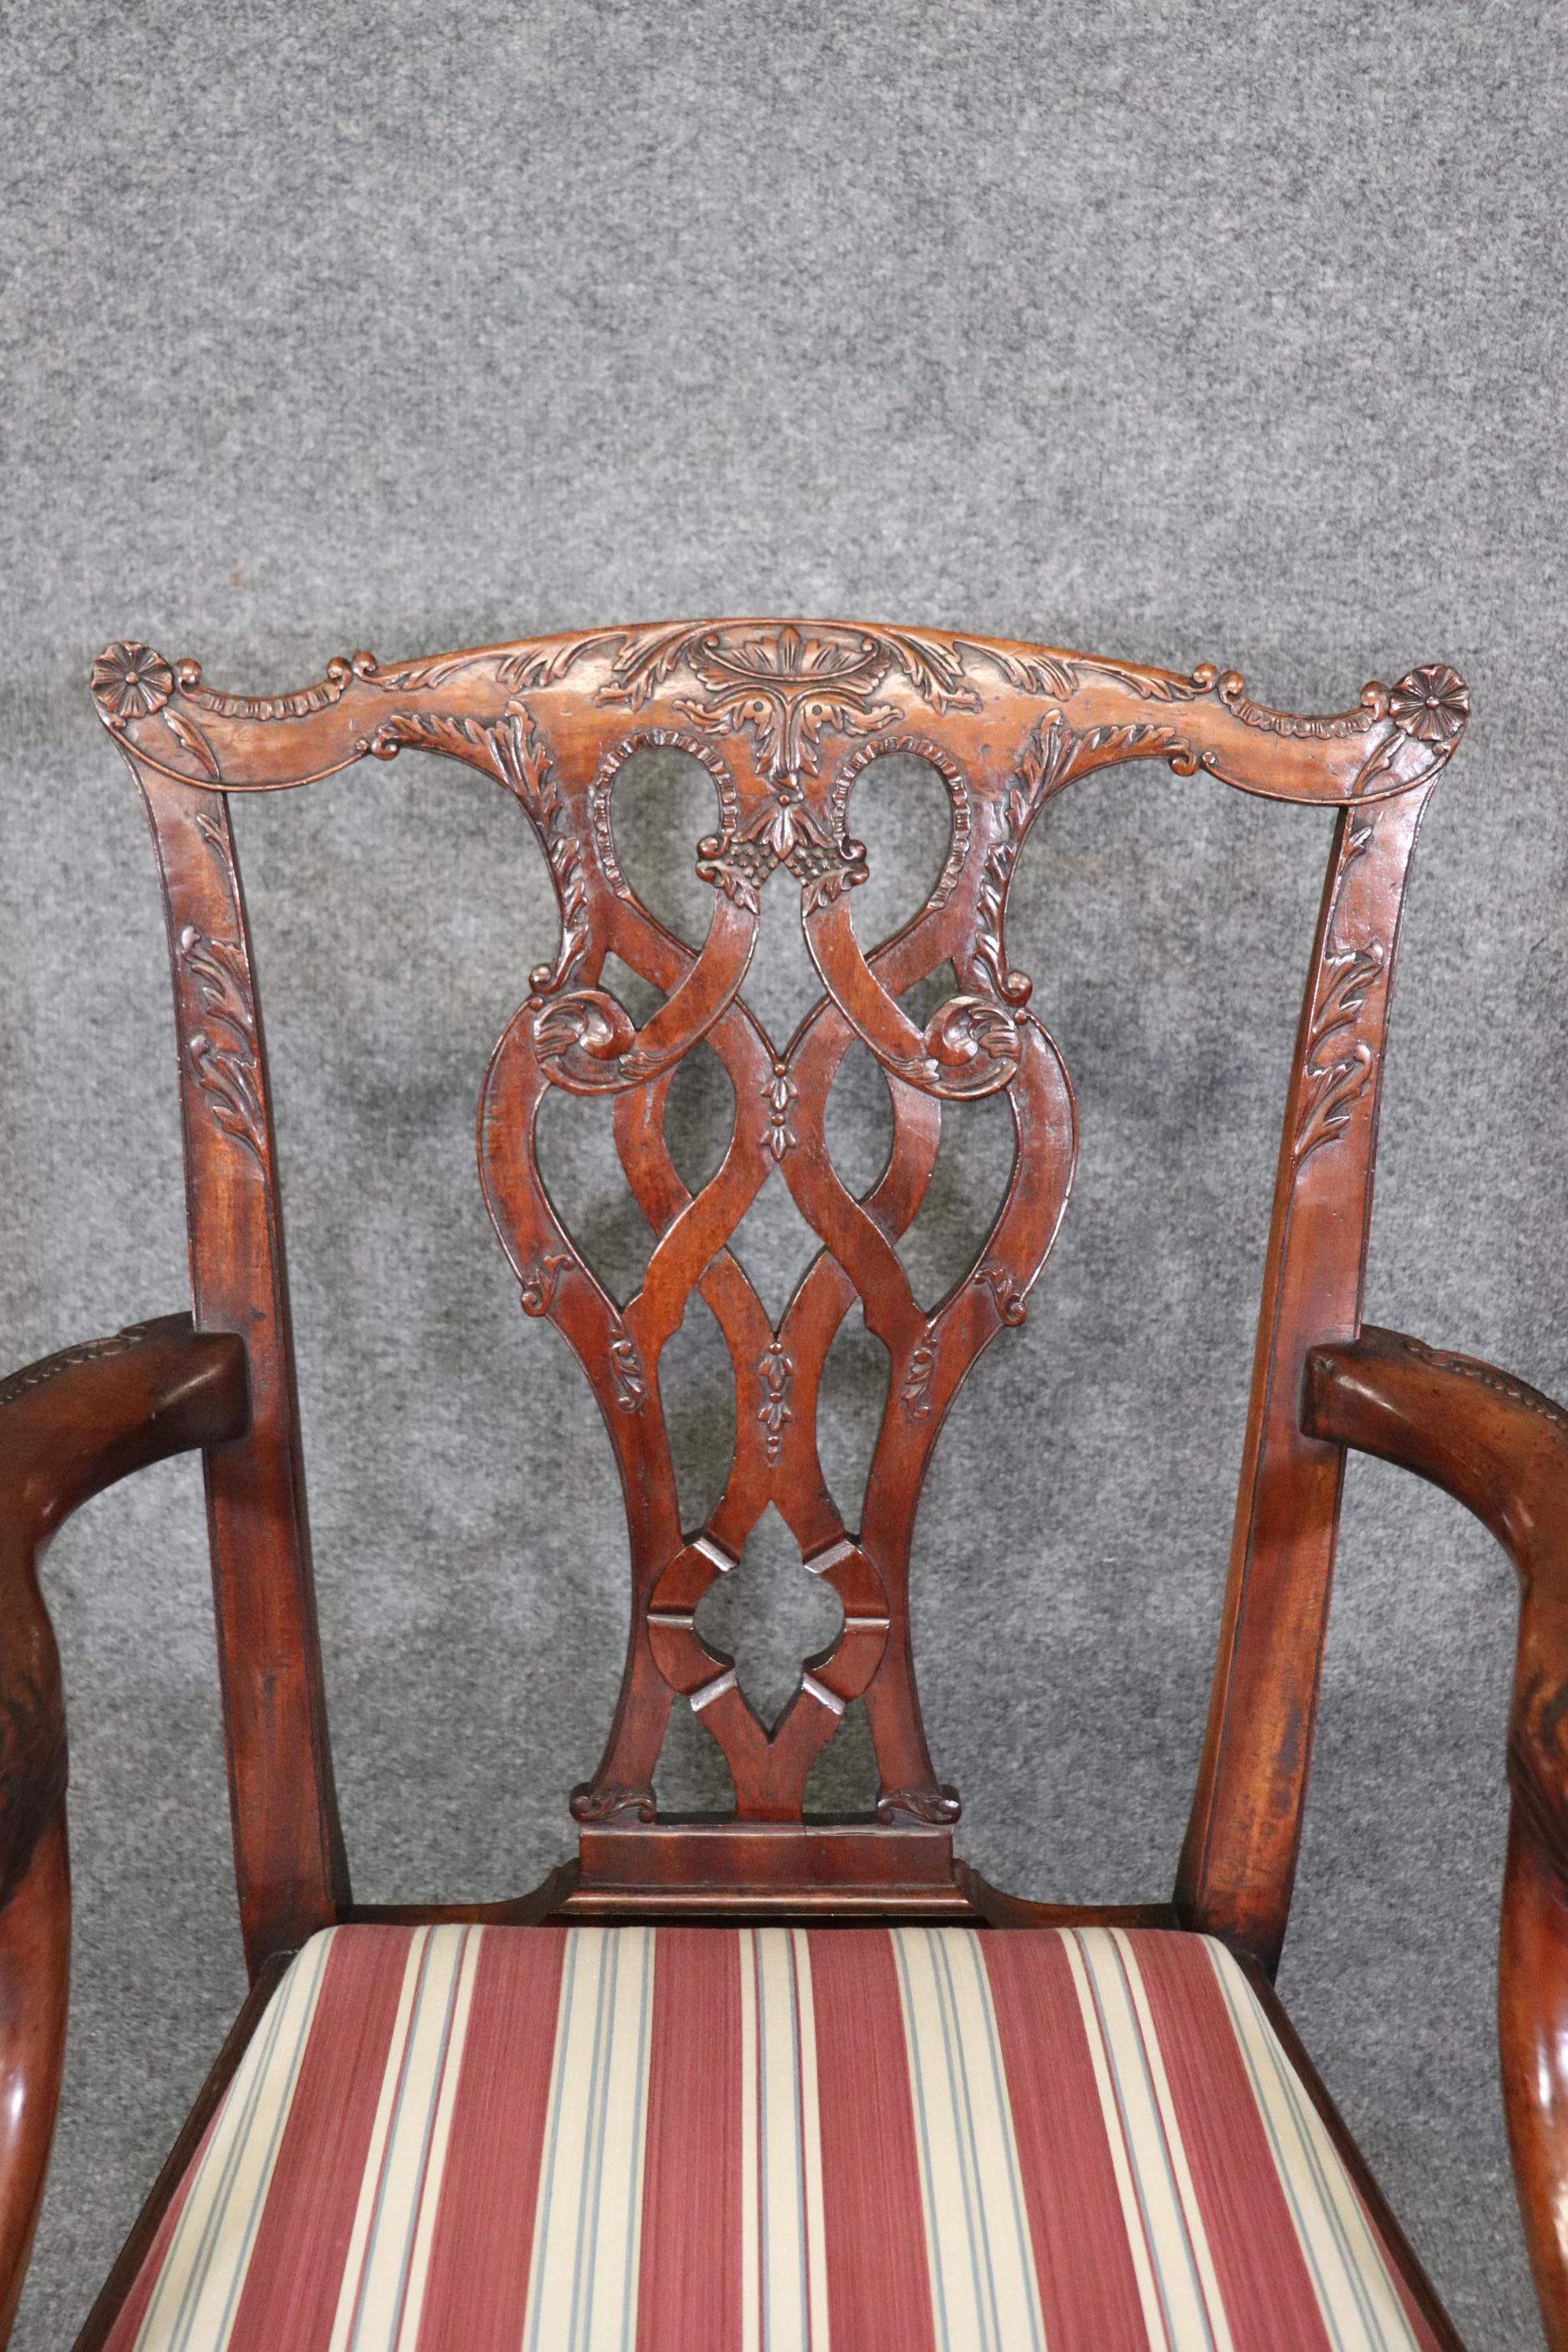 This is a gorgeous set of solid mahogany carved Chippendale style dining chairs. They feature beautiful acanthis carving and ball and claw feet as well as a pair of armchairs with dragon faced terminals at the end of the arms. They are in good